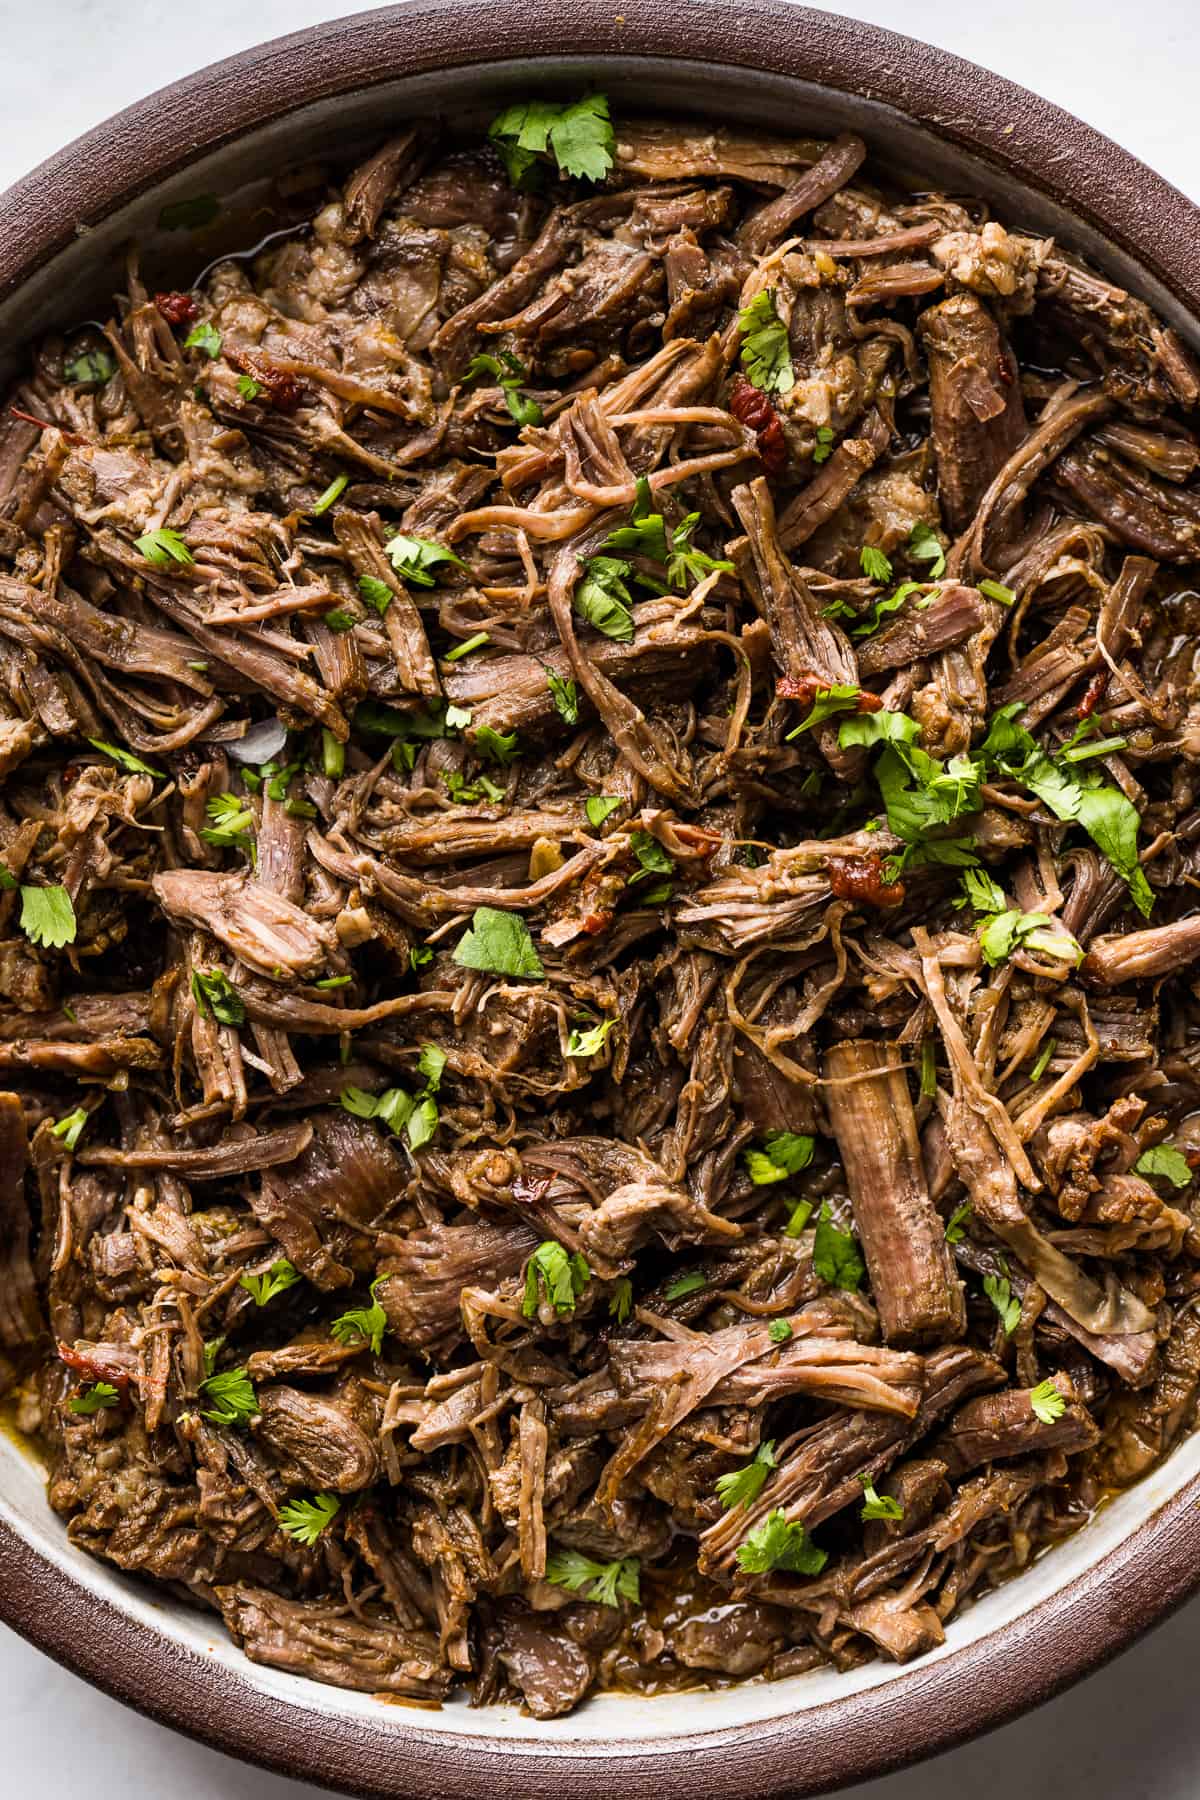 Shredded barbacoa beef in a serving bowl ready to eat.